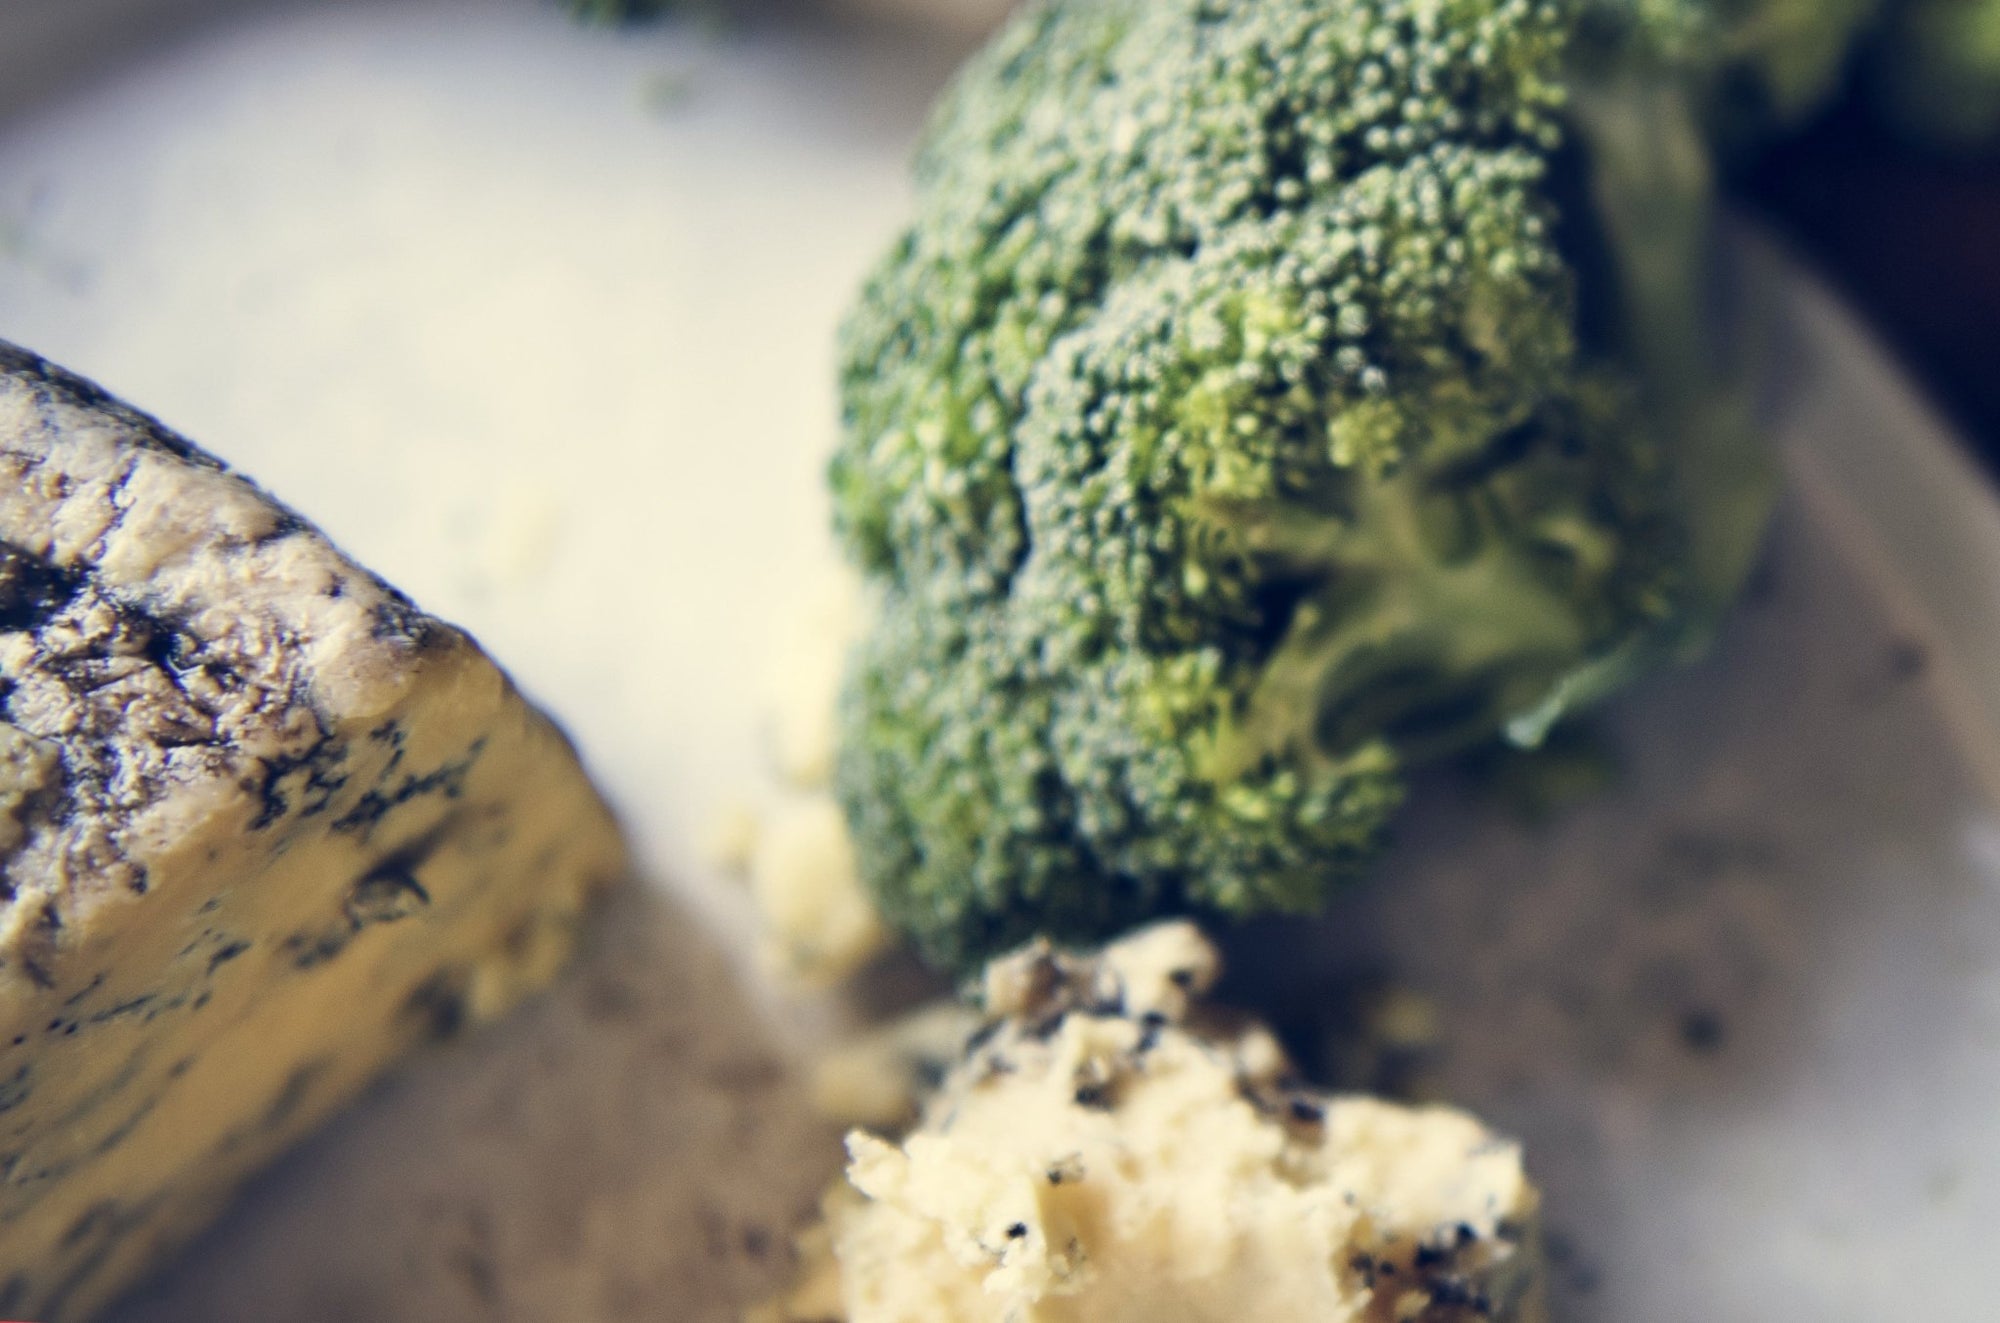 Blood Orange Infused Roasted Broccoli w/ Blue Cheese Crumble - Texas Hill Country Olive Co.